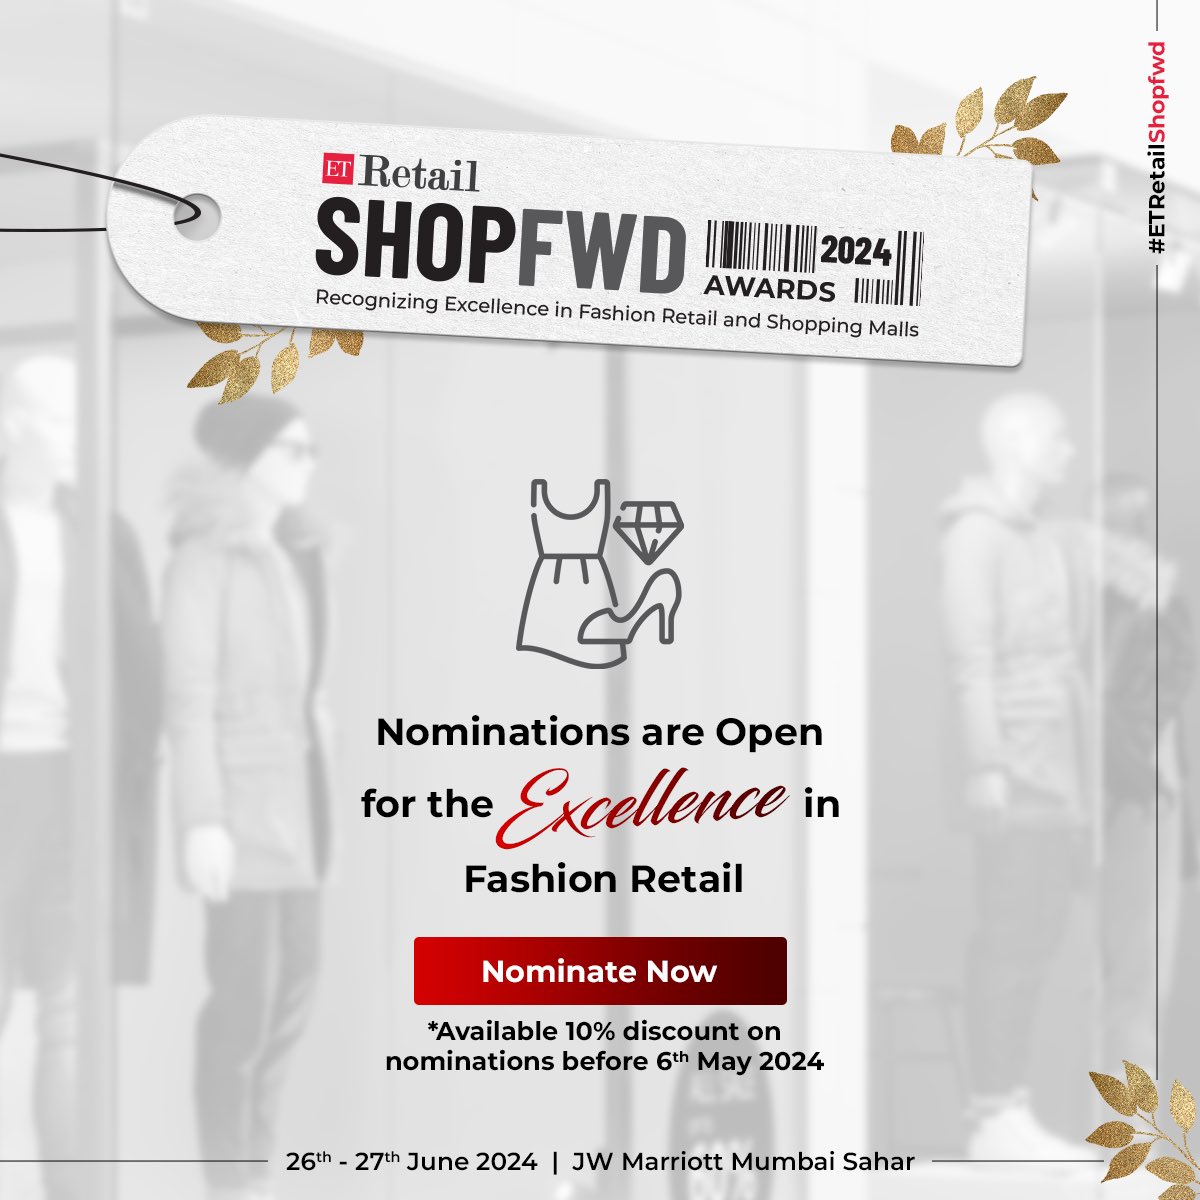 Calling all fashion trailblazers! Nominate for Excellence in Fashion Retail at the ET Retail Shopfwd Awards 2024. Early birds enjoy a 10% discount until May 6th. Nominate Here- bit.ly/3w99l1M #ETRetail #ETRetailShopFwd #ShopfwdAwards #RetailExcellence #ShoppingMall